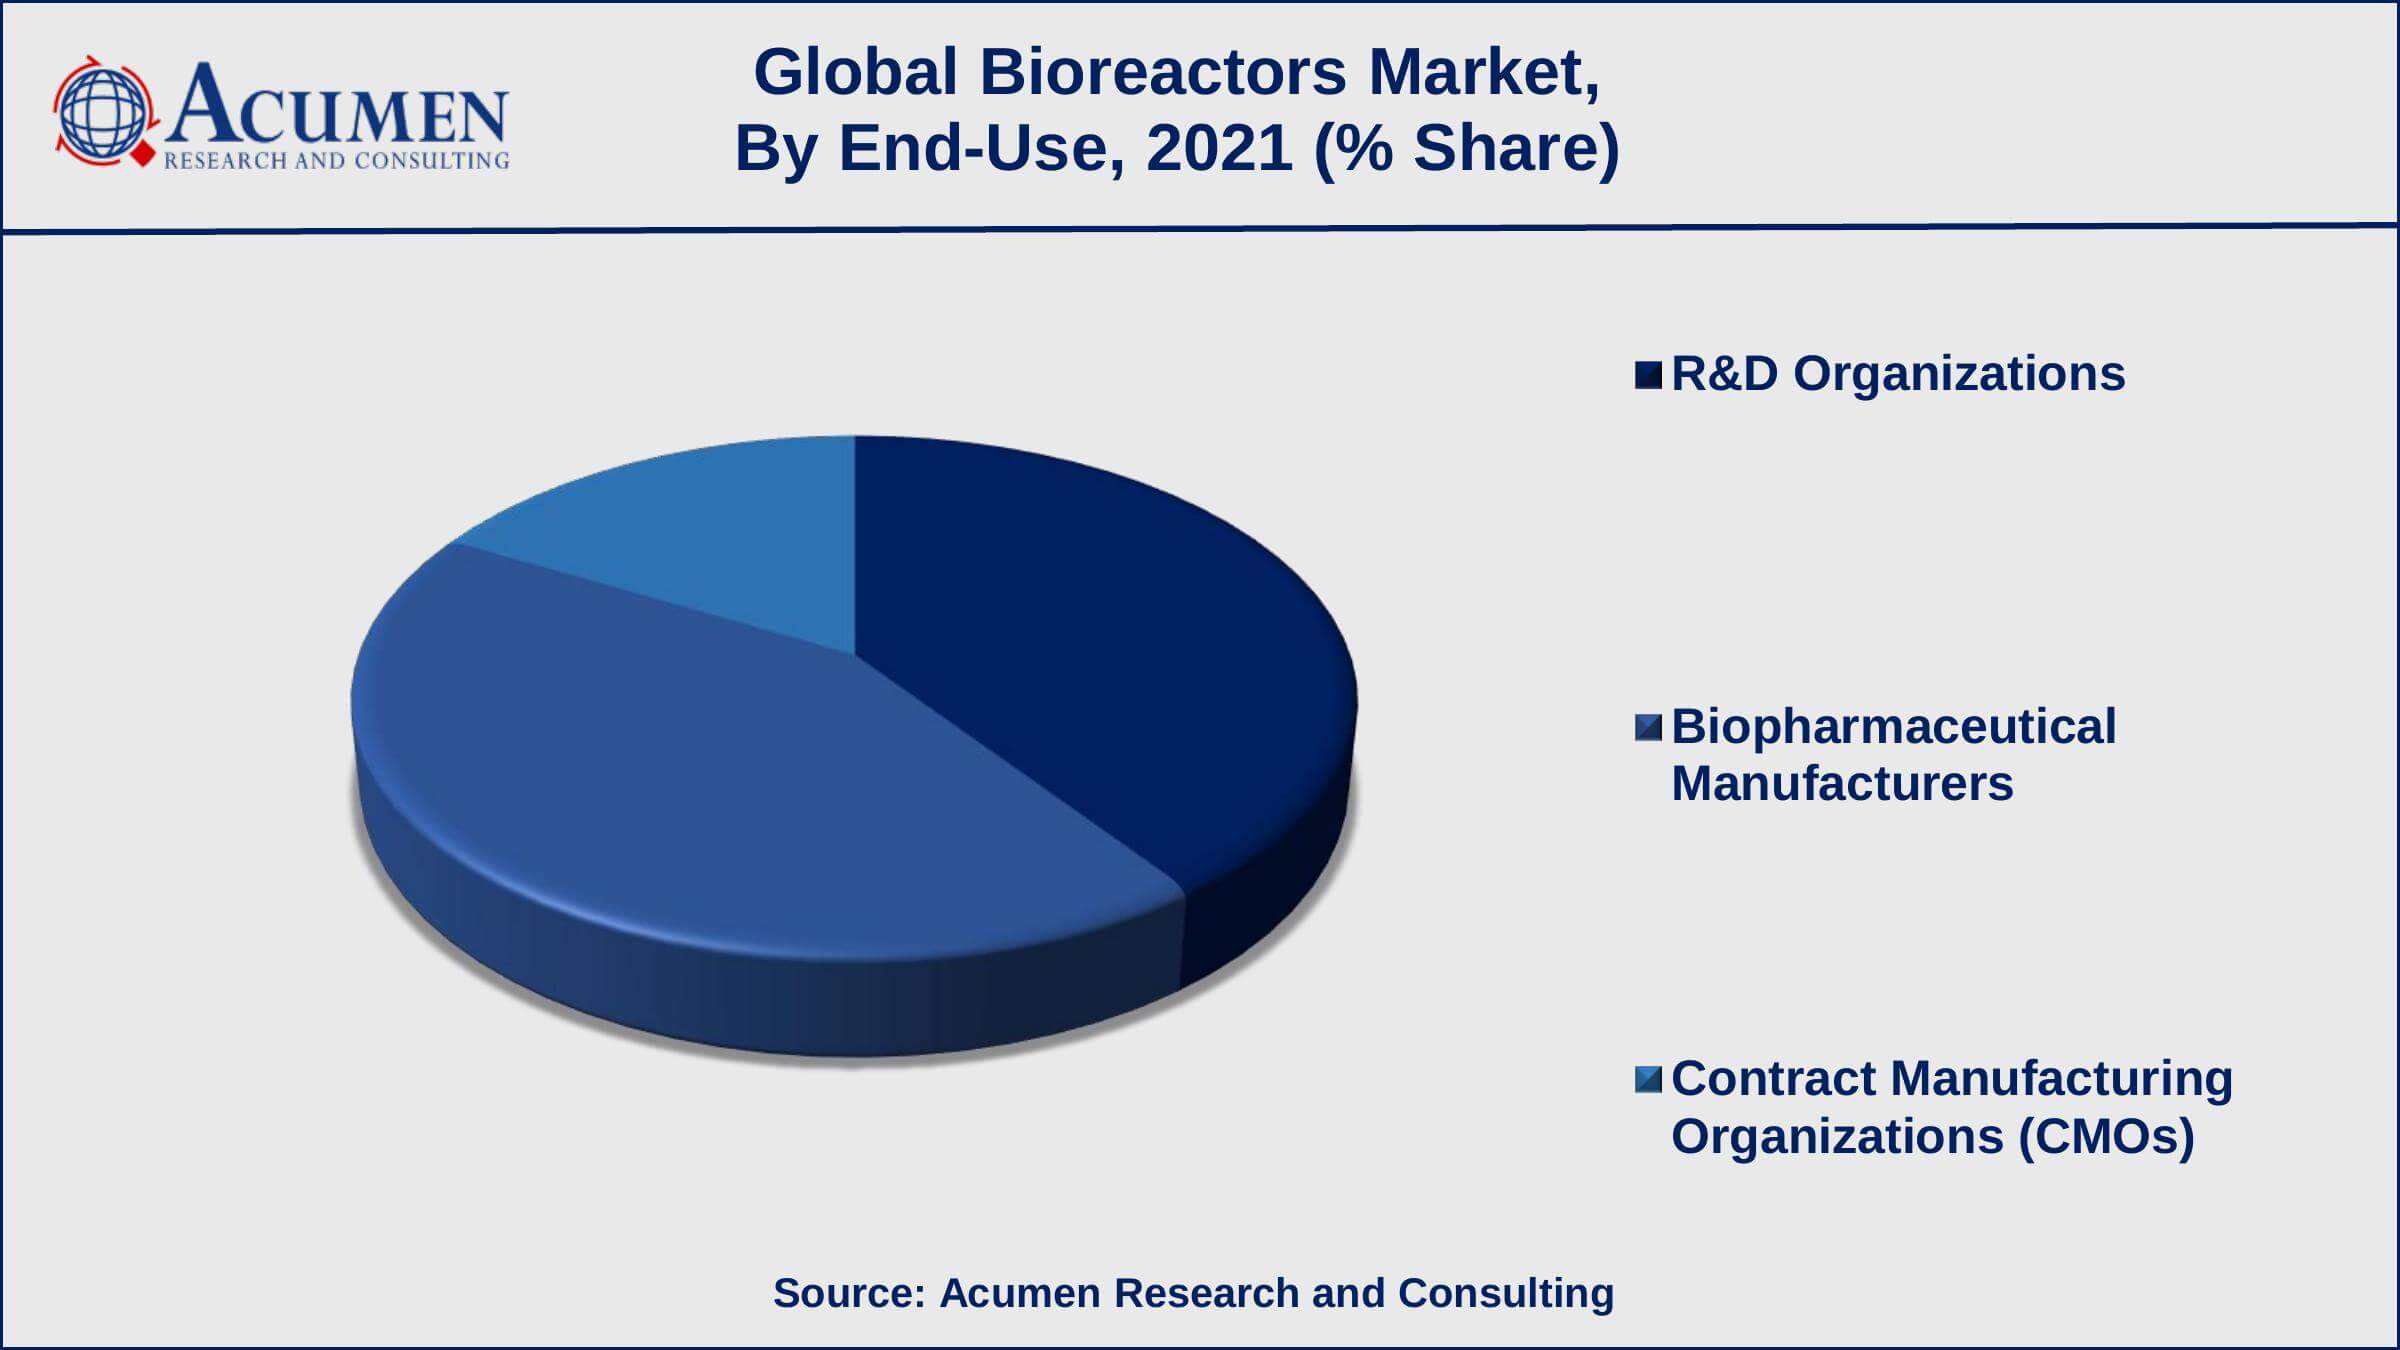 Among end-use, biopharma manufacturers sub-segment accounted for USD 989 million in 2021